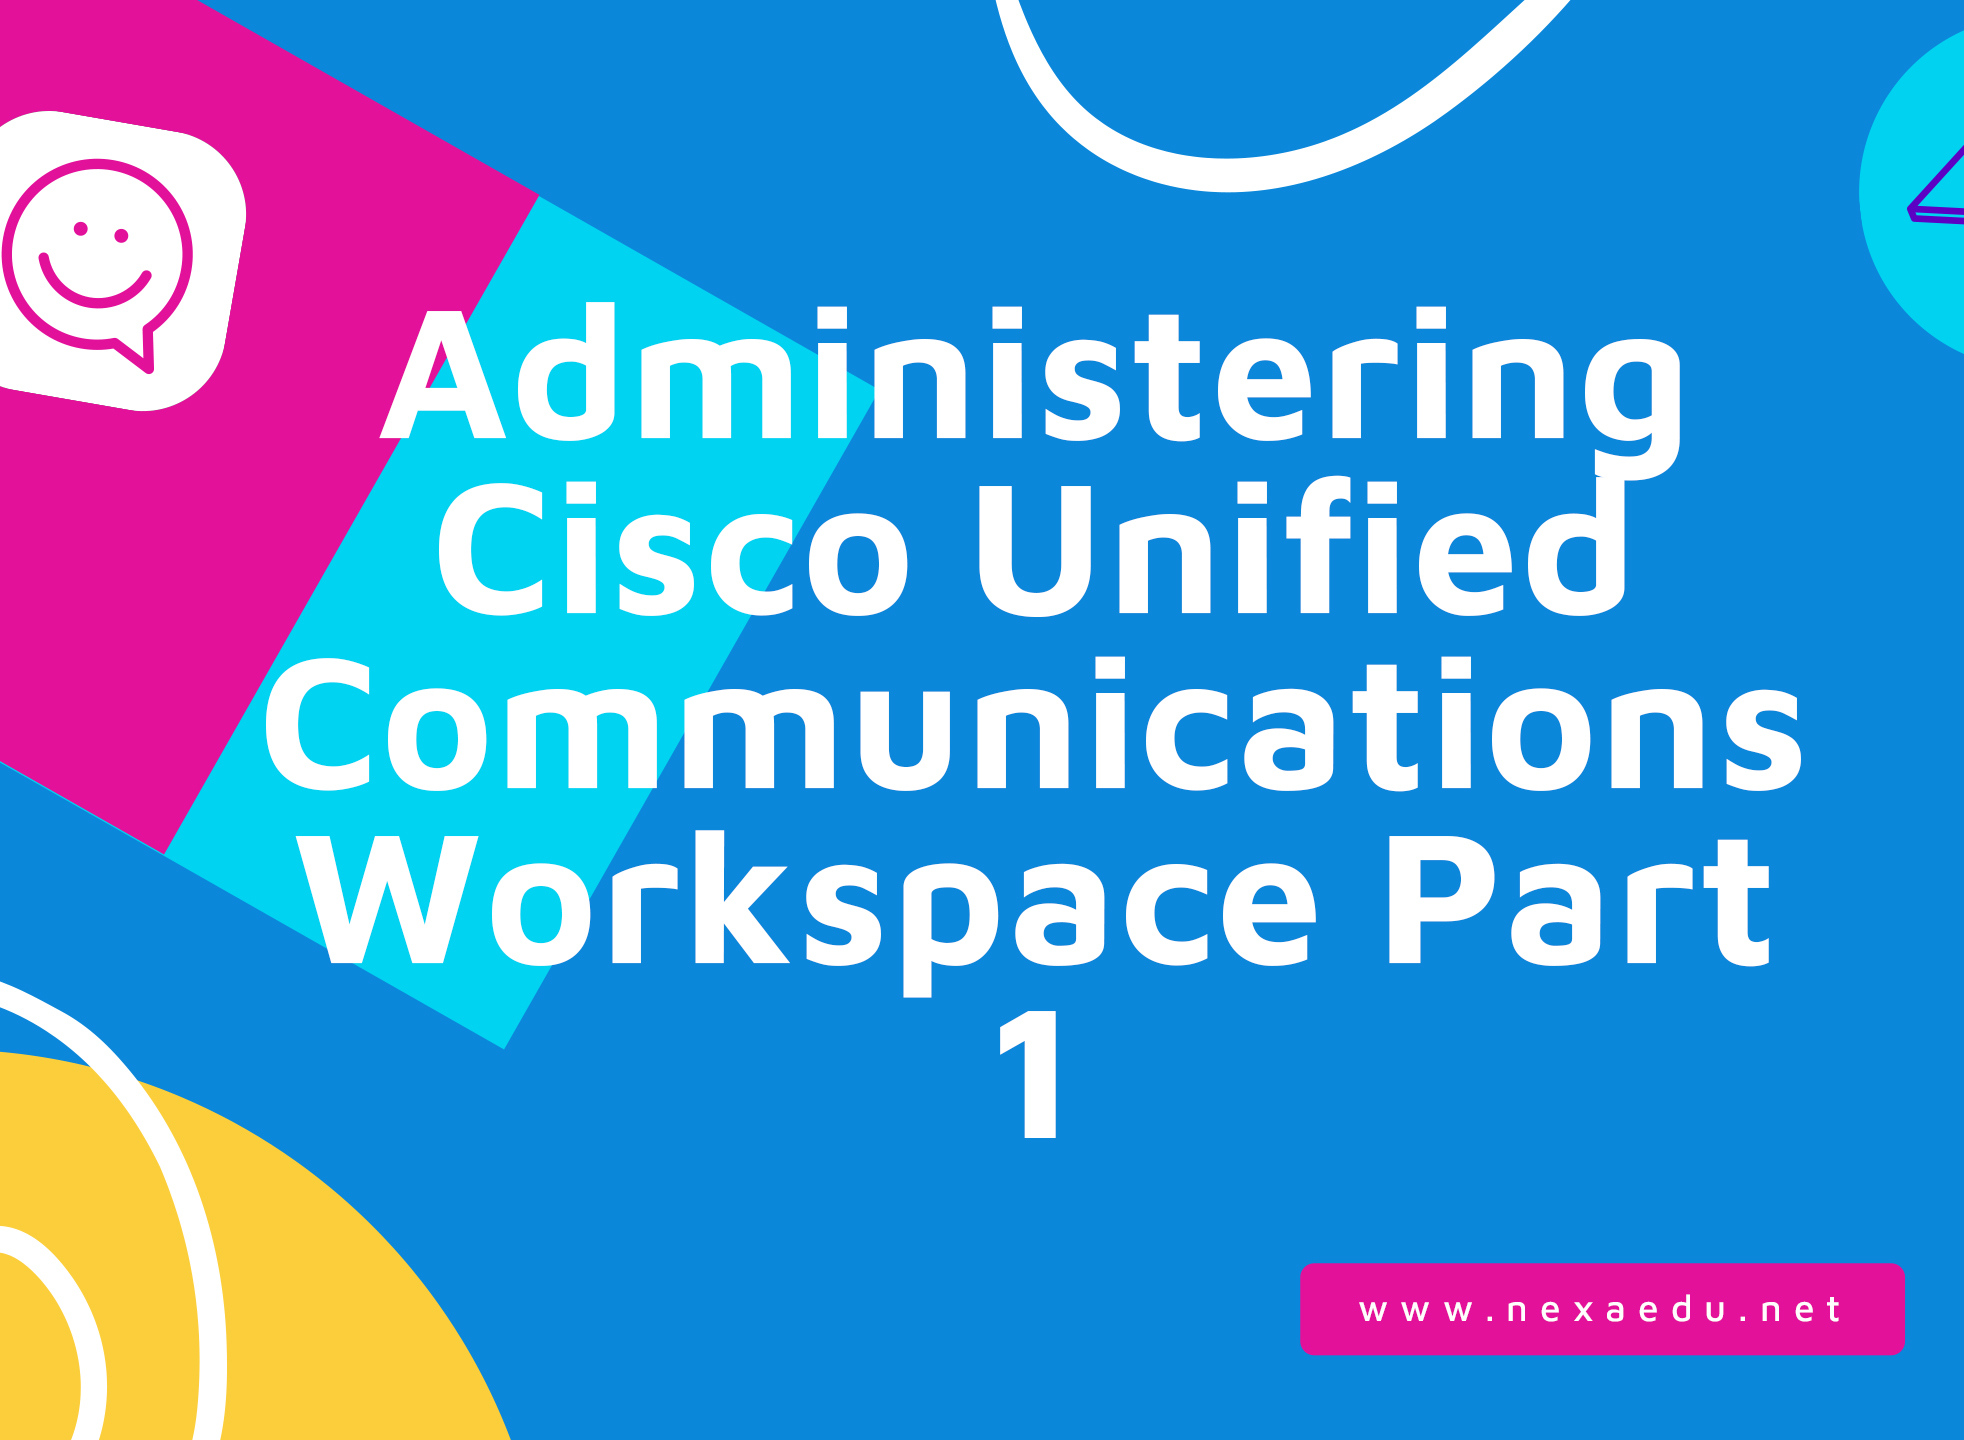 Administering Cisco Unified Communications Workspace Part 1